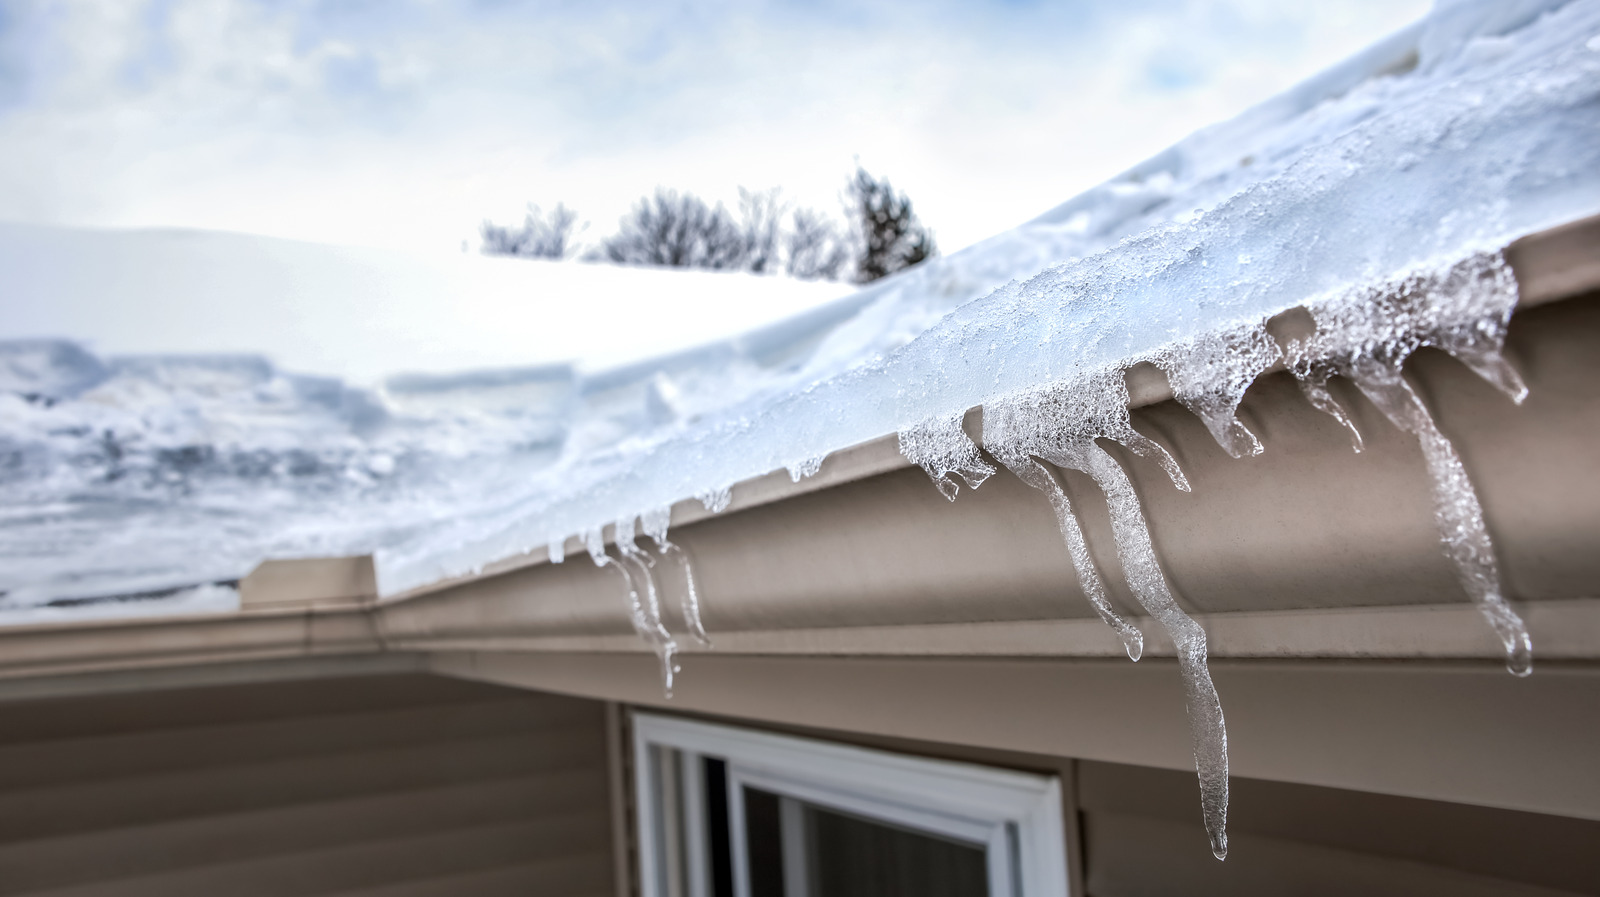 How To Get Rid Of Ice Dams (And Prevent Them In The Future)